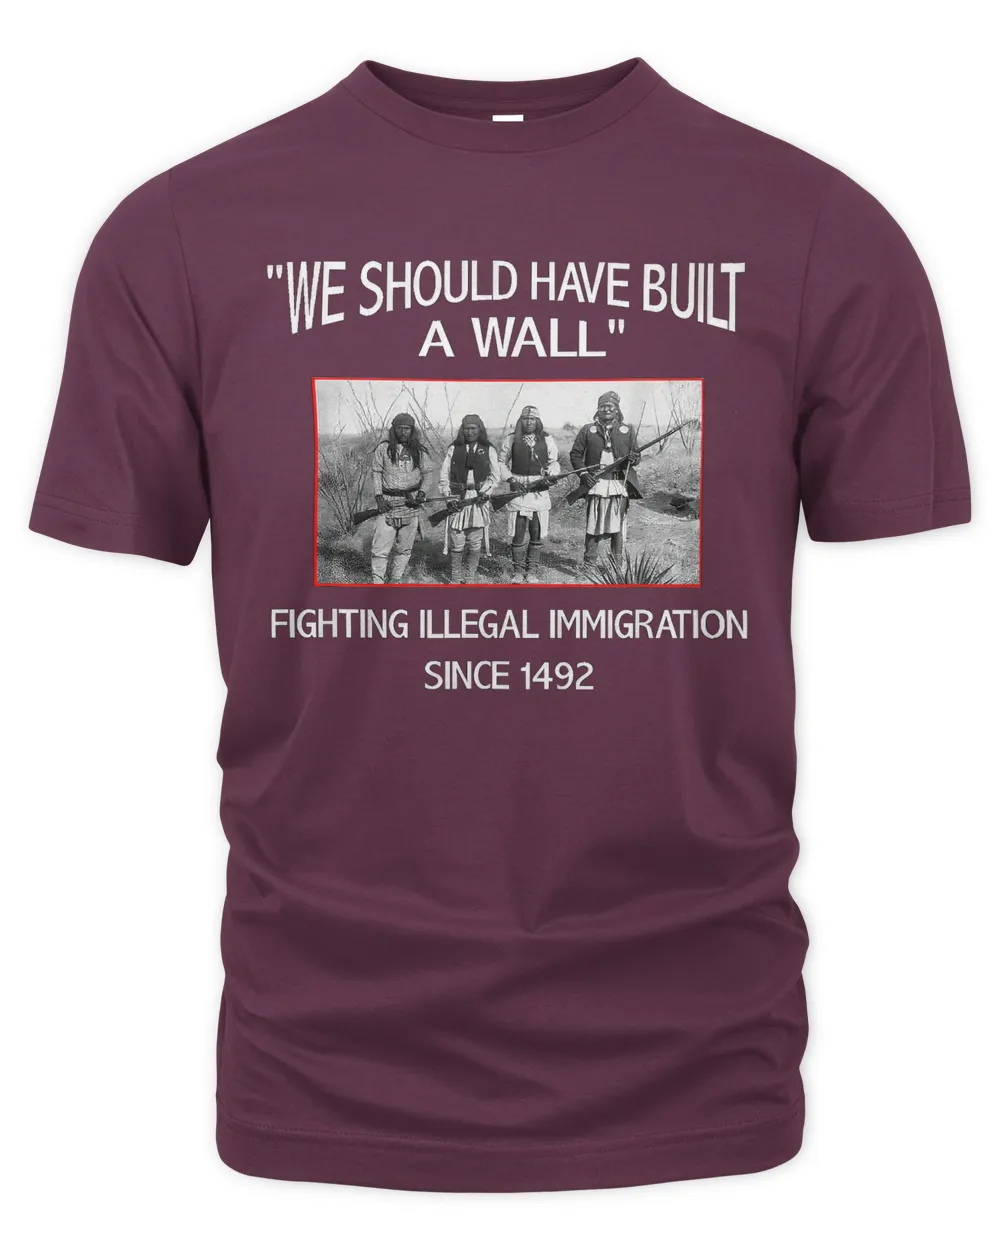 naa-zbx-20 We Should Have Built A Wall Fighting Illegal Immigration Since 1492